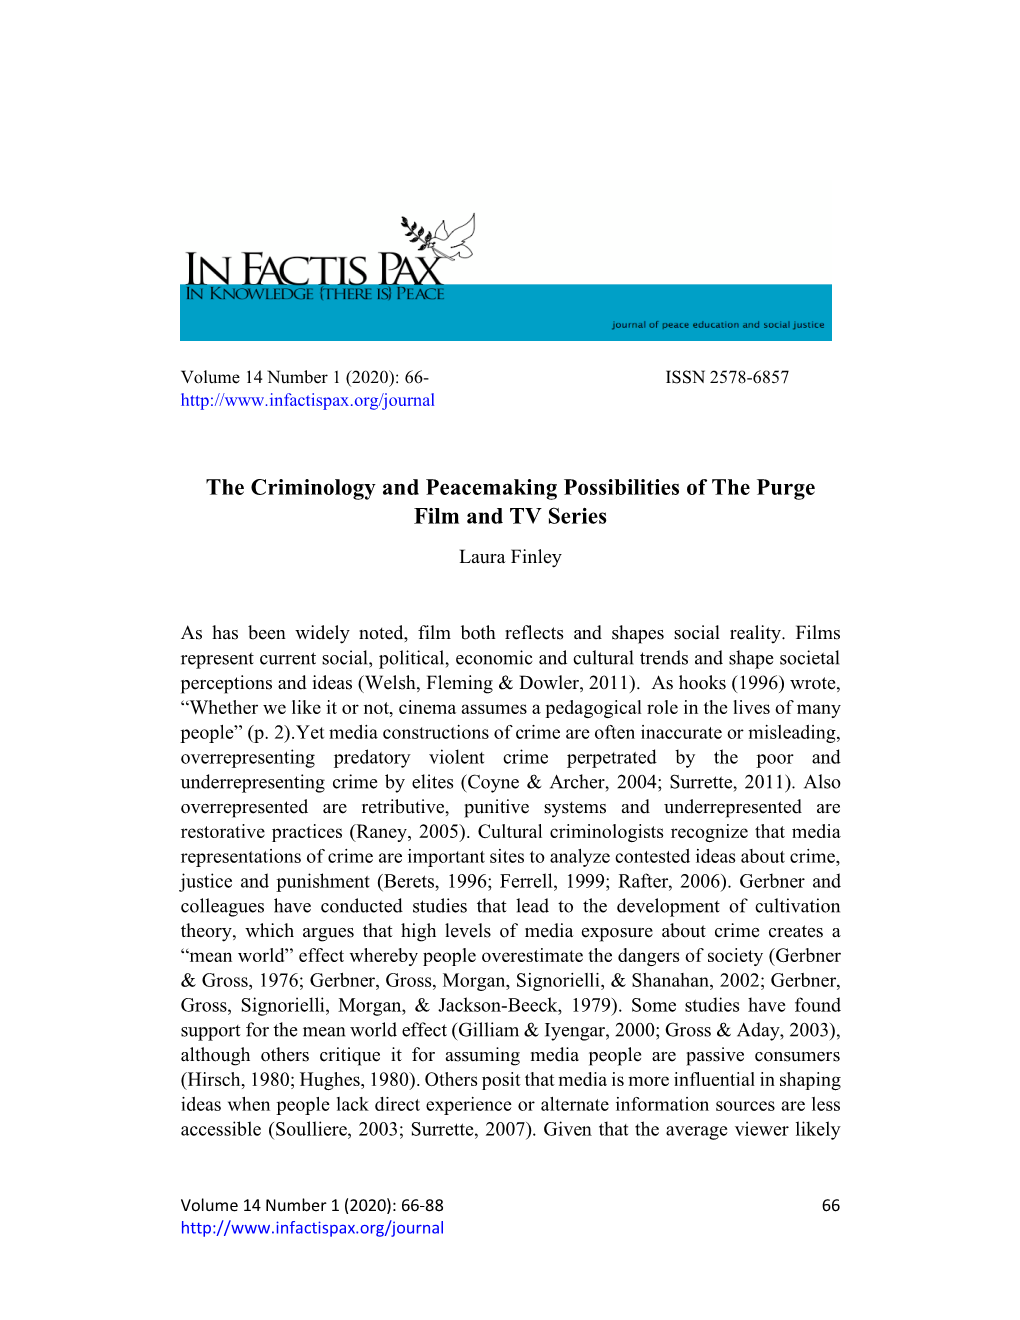 The Criminology and Peacemaking Possibilities of the Purge Film and TV Series Laura Finley